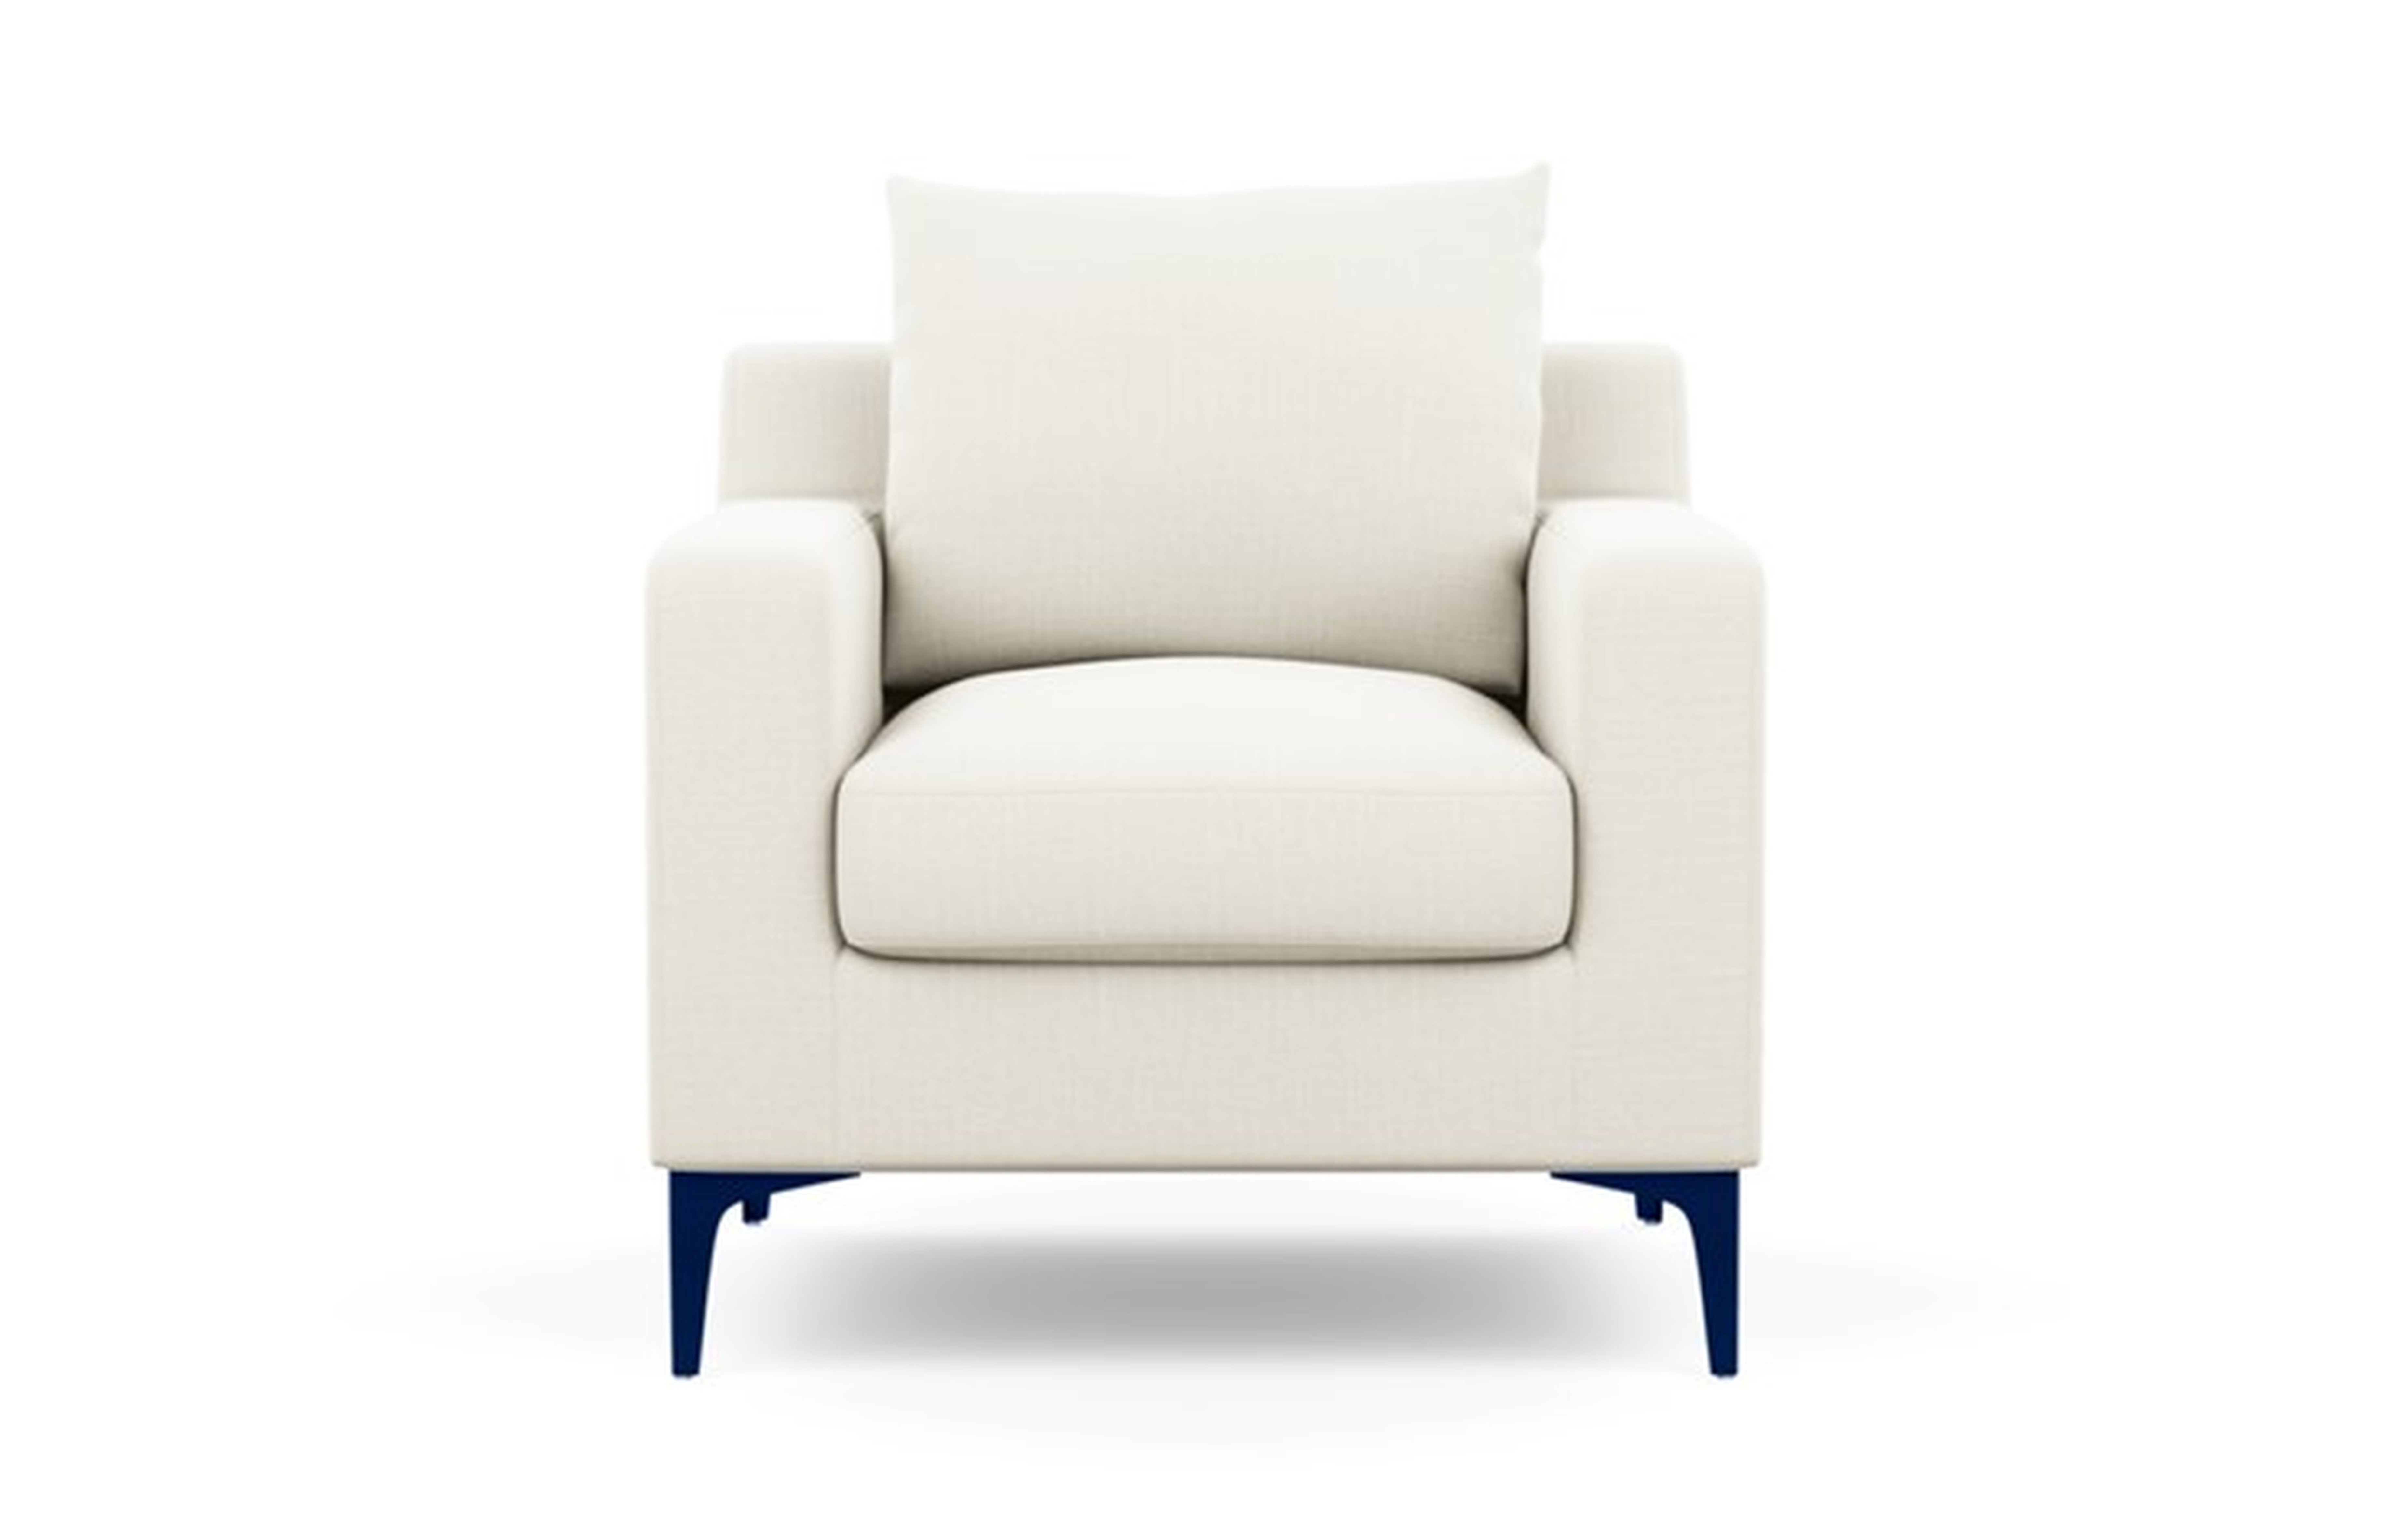 Sloan Petite Chair with Ivory Fabric and Matte Indigo legs - Interior Define